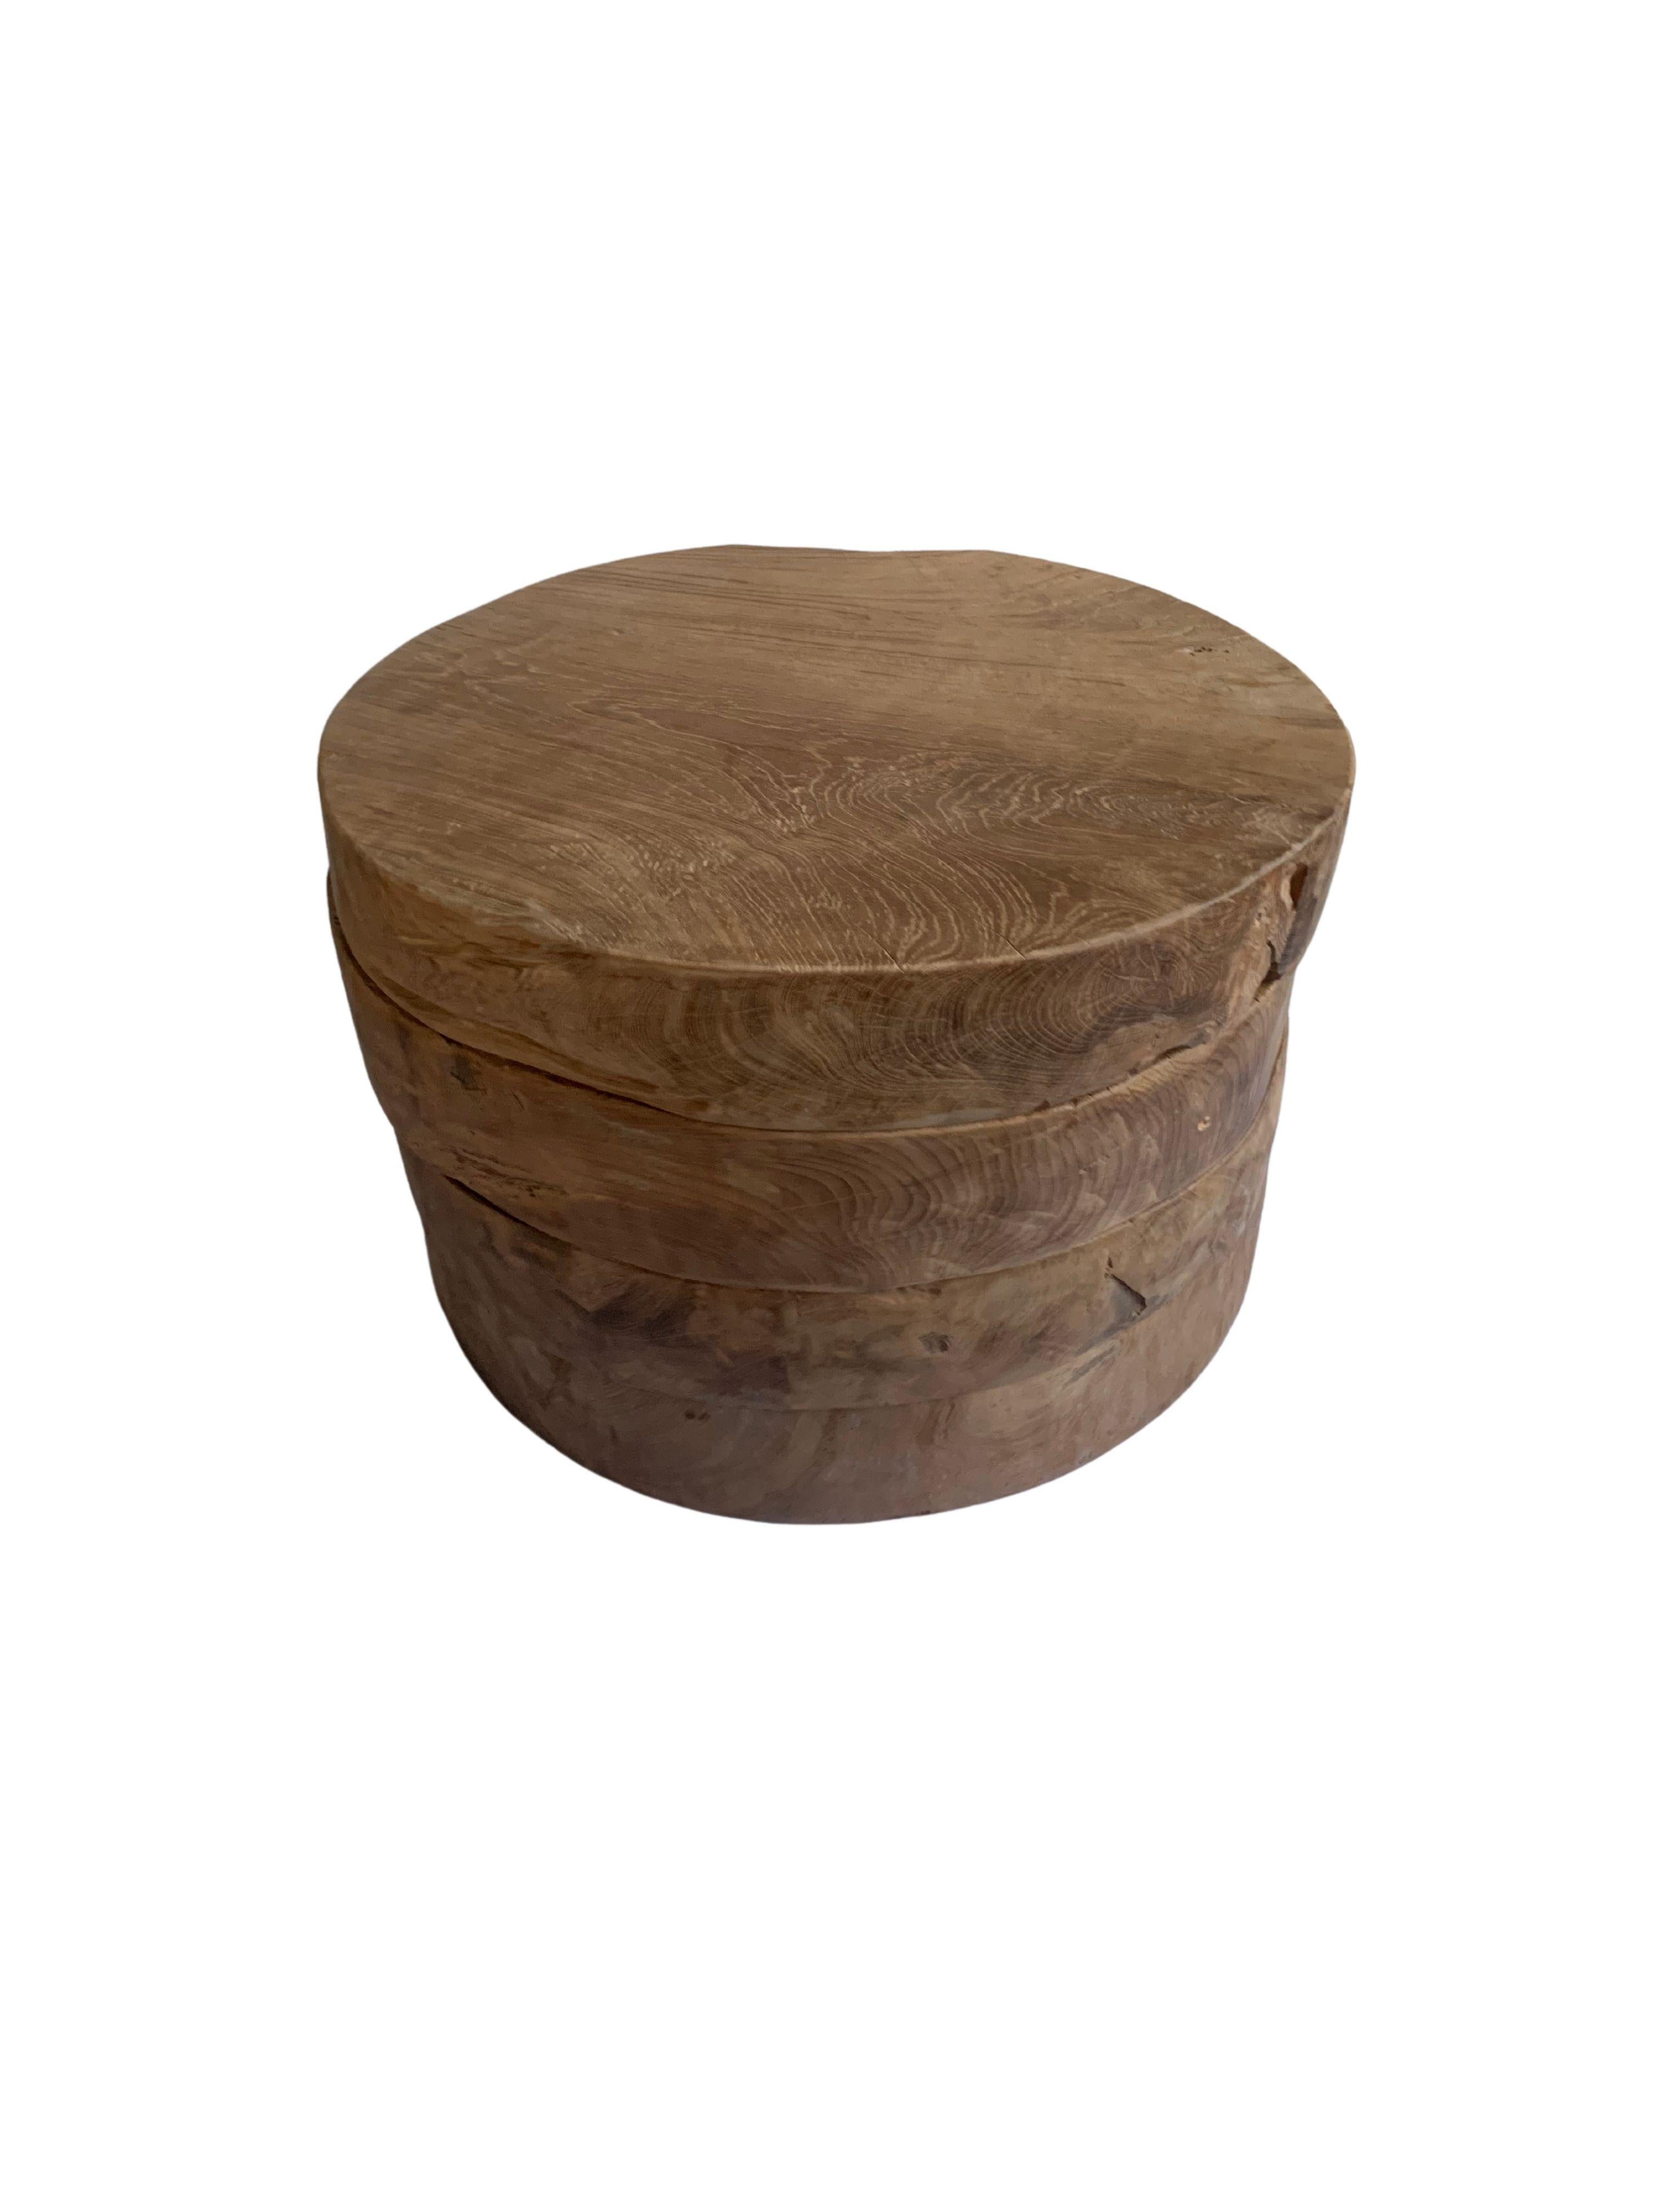 Indonesian Sculptural Side Table Crafted from Round Solid Teak Wood Slabs